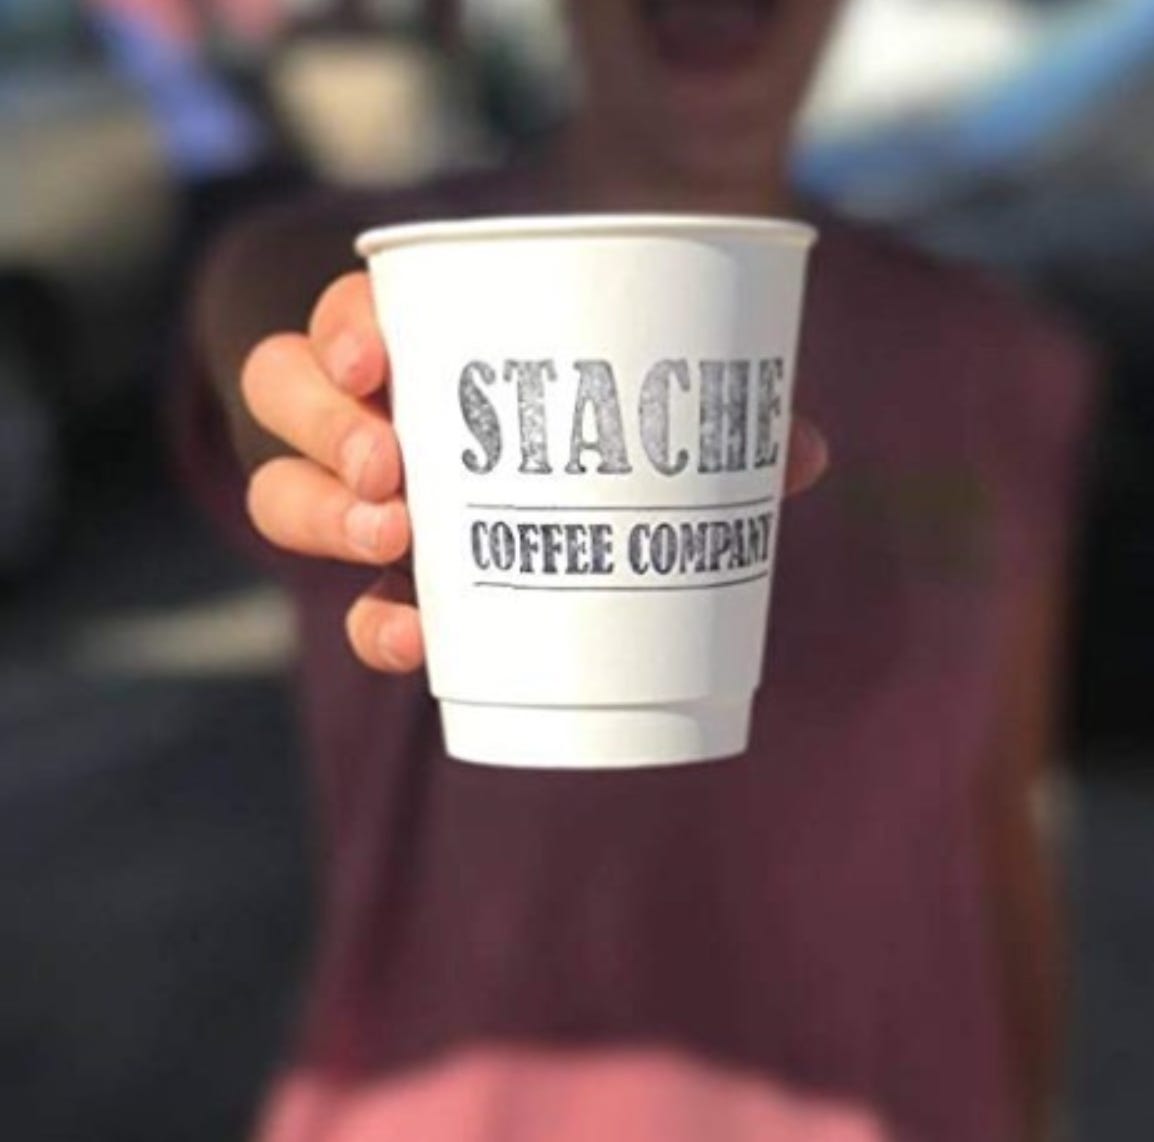 A white take out cup held up to the camera (background blurred) that has "Stache Coffee Company" inked on it.